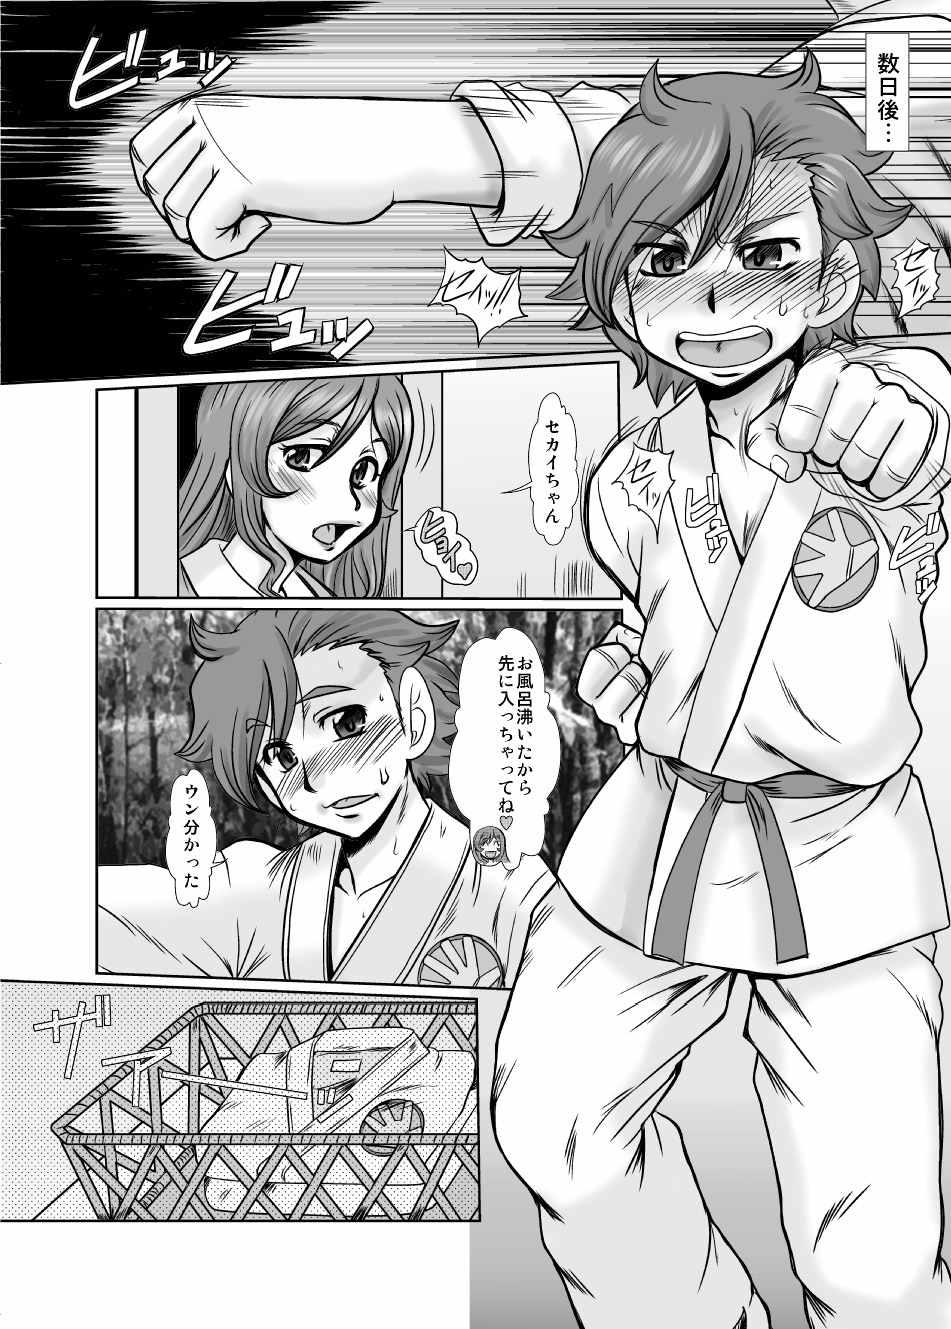 Tall F-83 - Gundam build fighters try Lez - Page 8